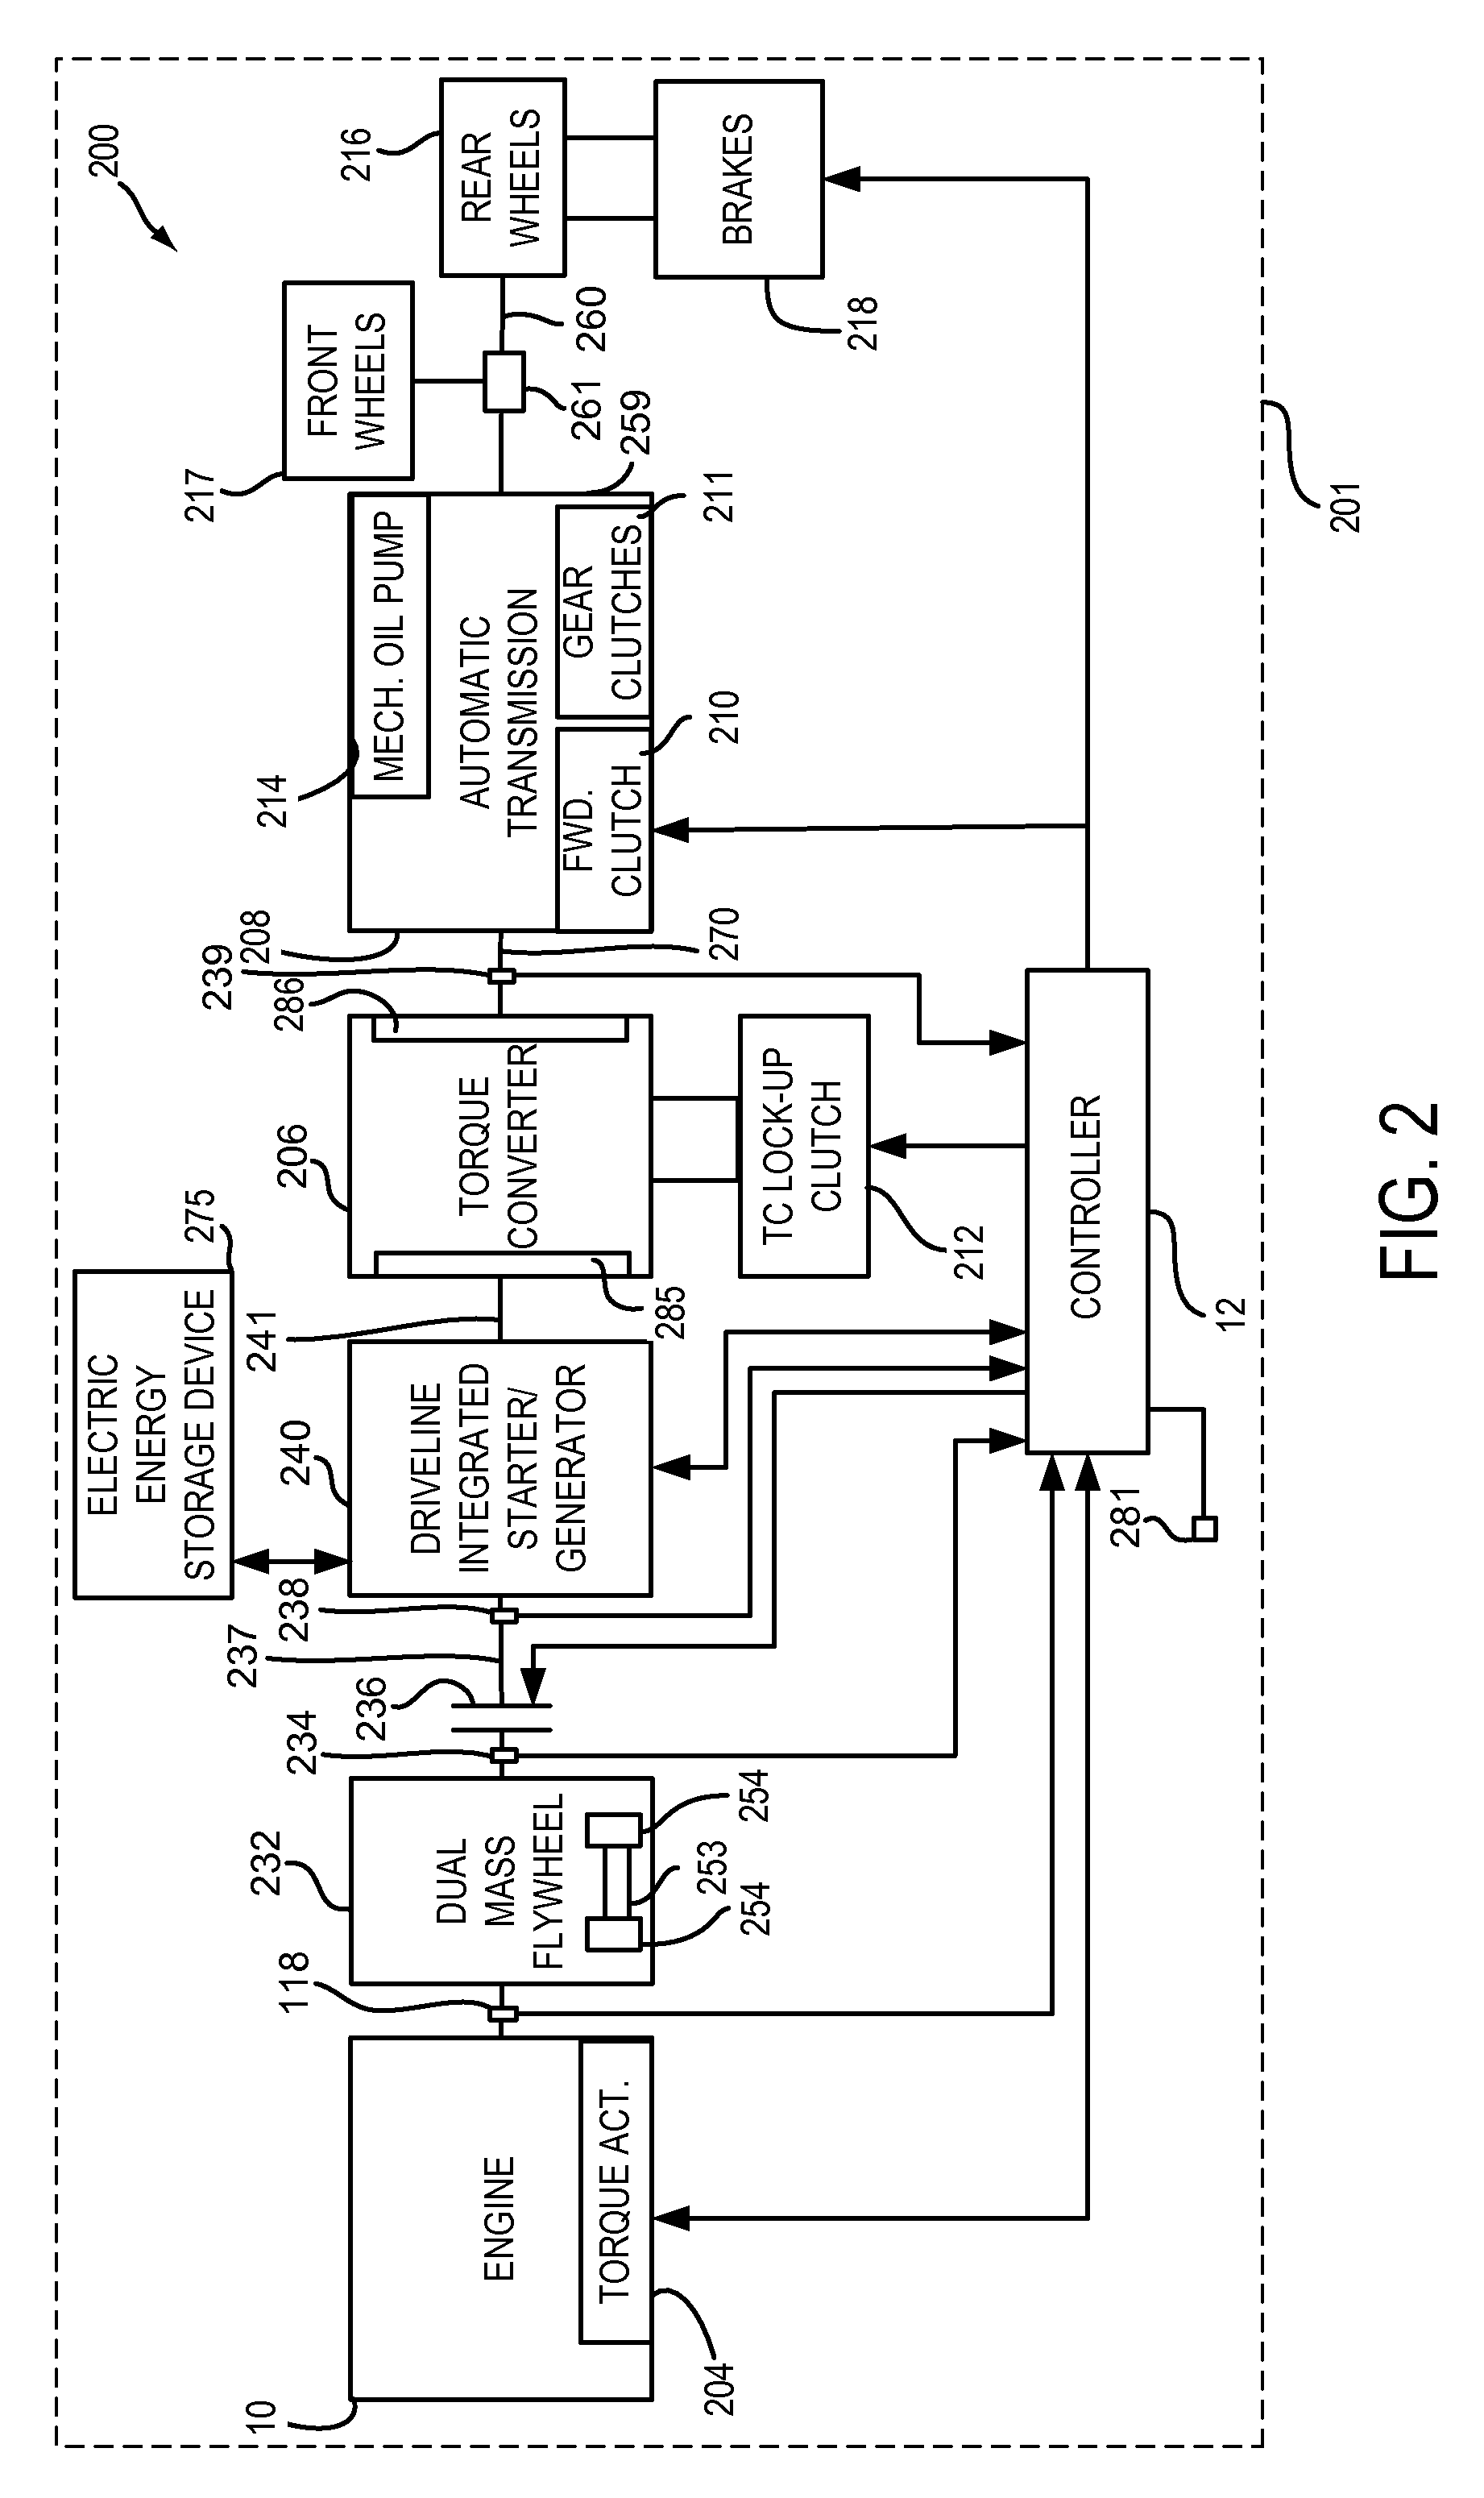 Method and system for operating a hybrid powertrain